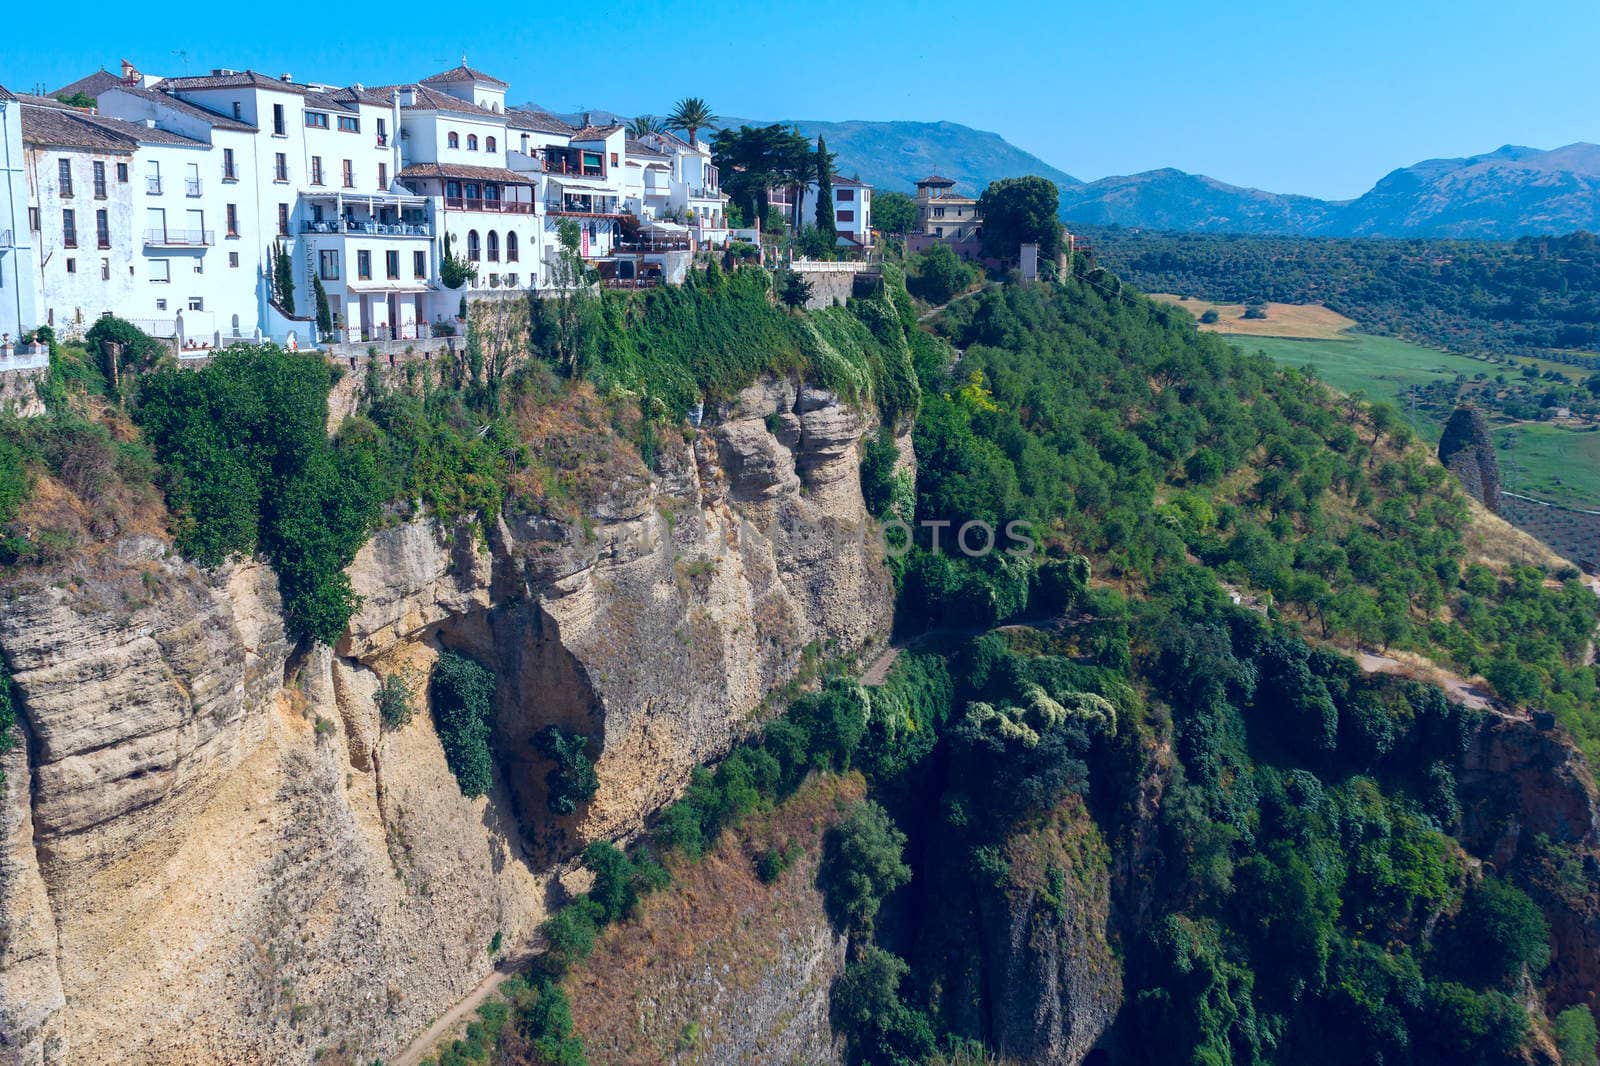 View of the Spanish city of Ronda by BIG_TAU